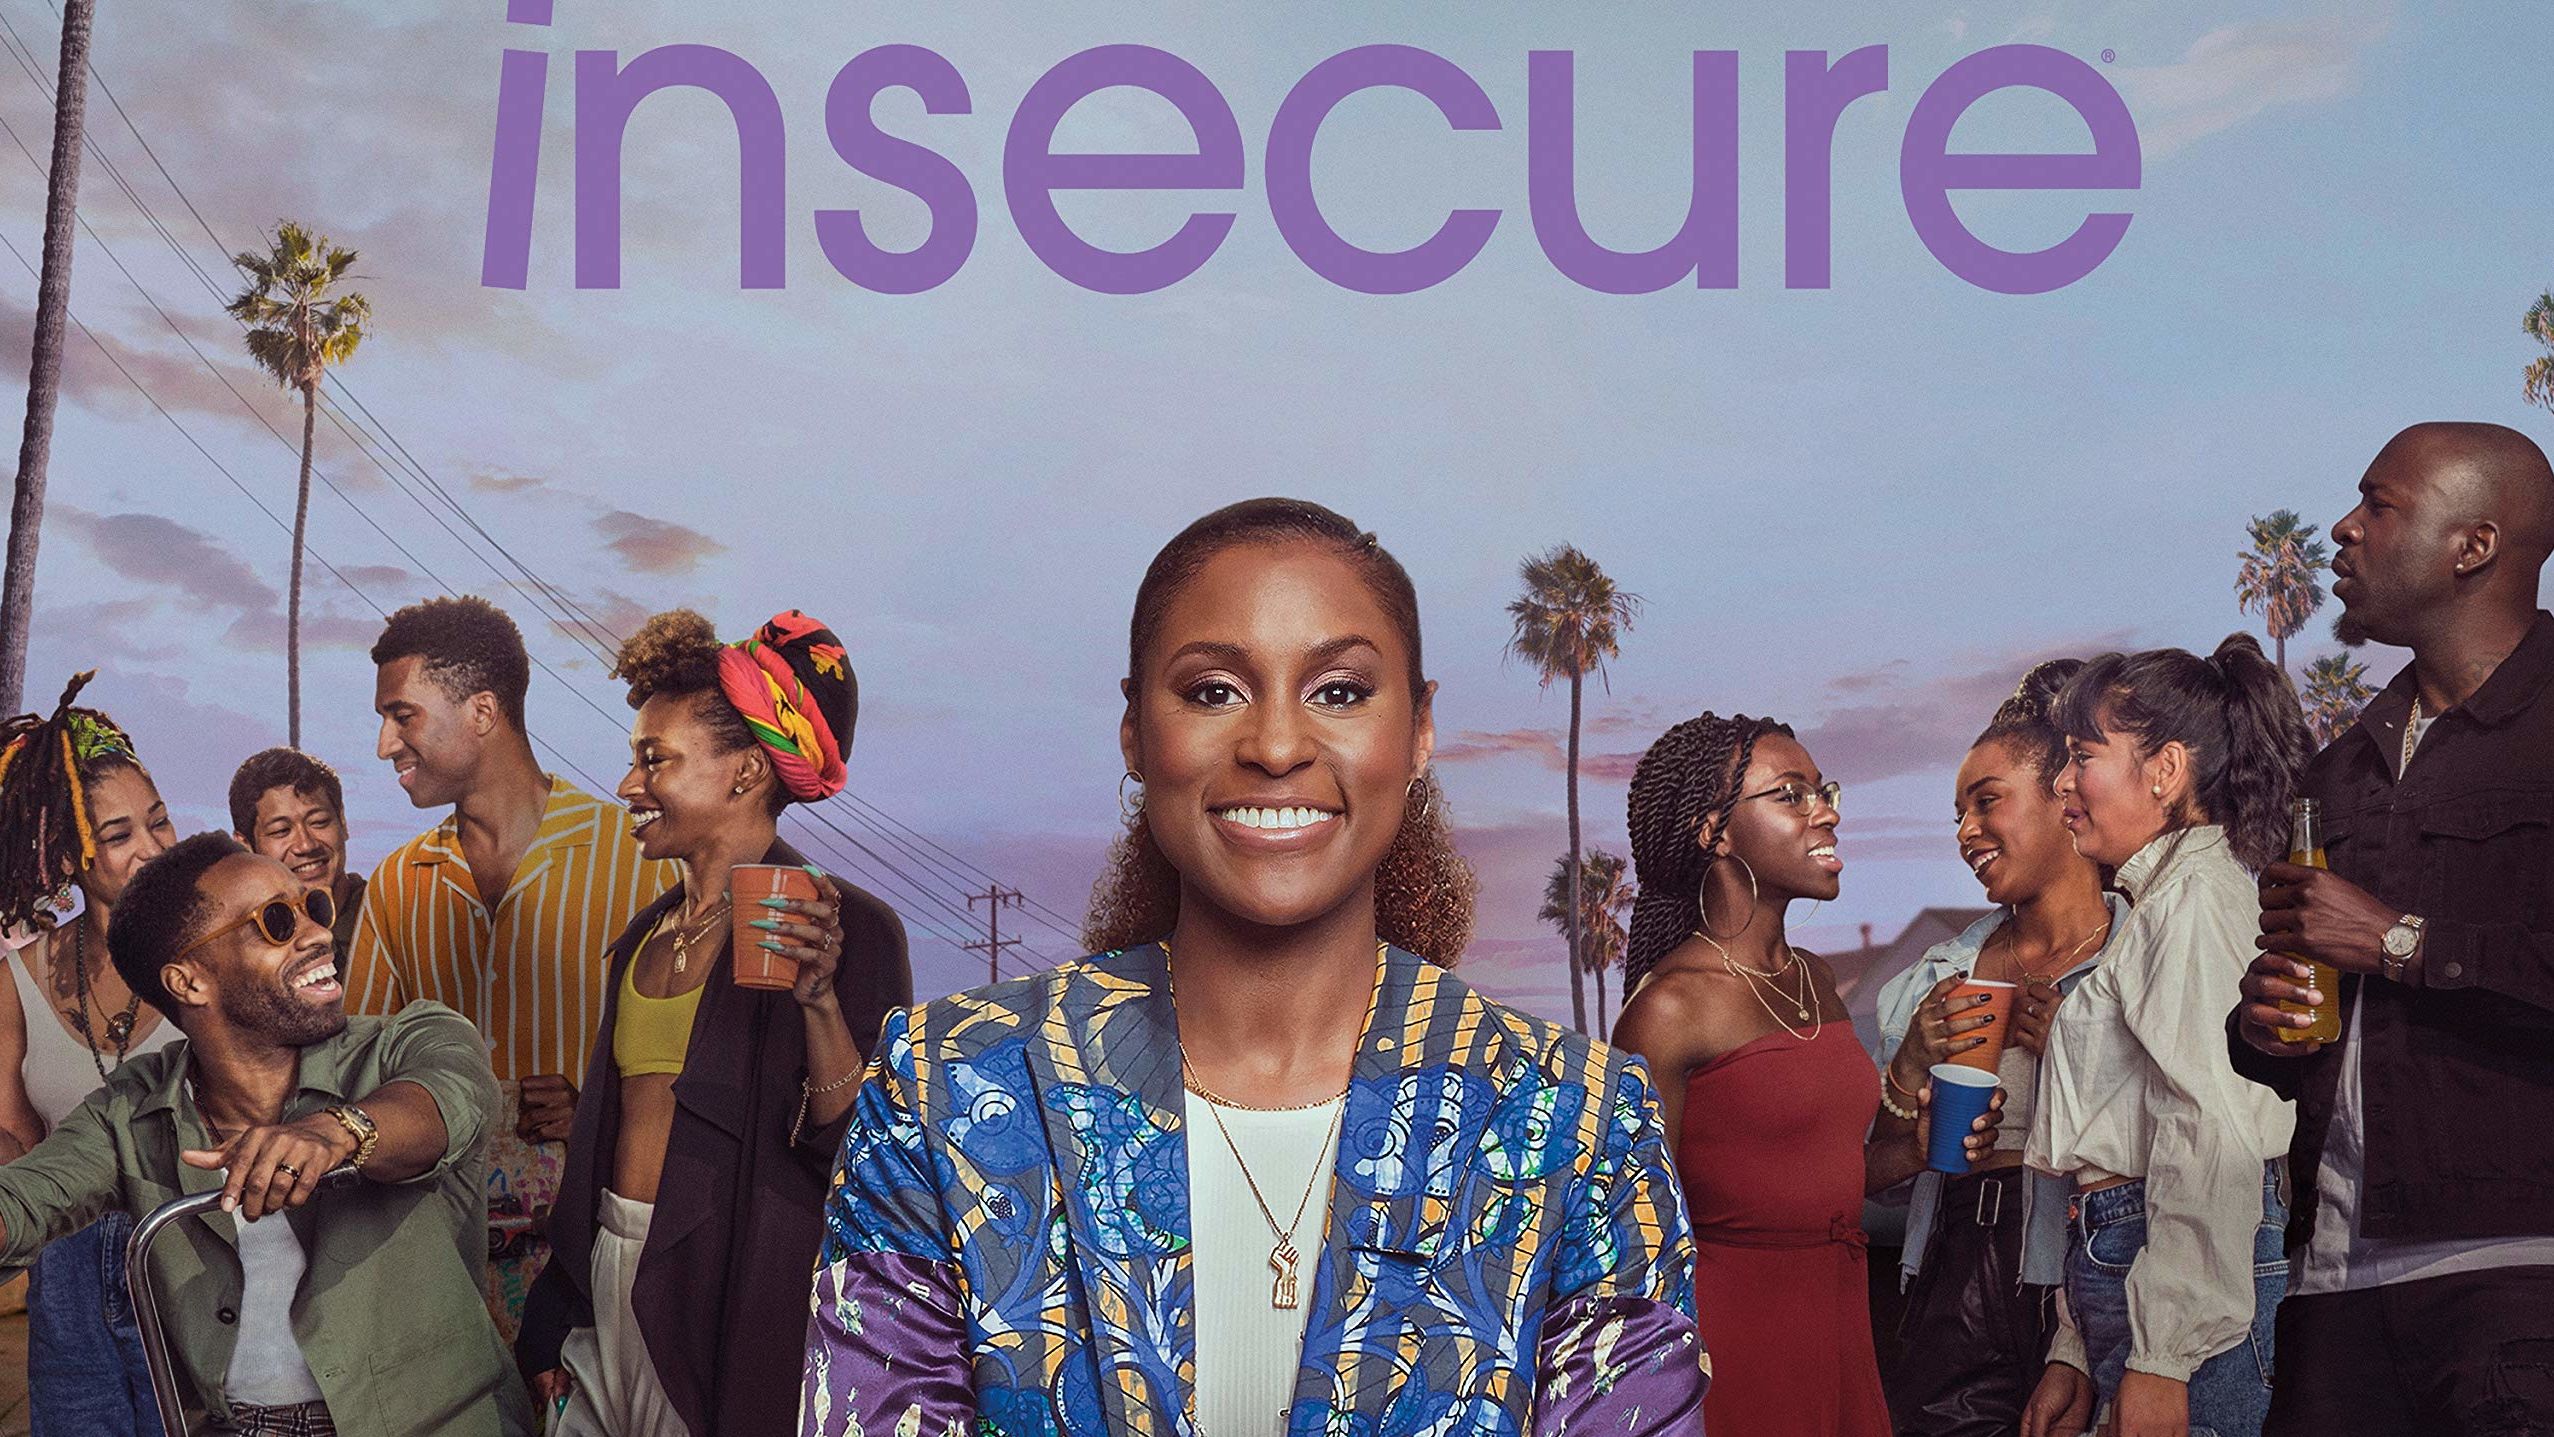 Issa Rae stars in the HBO hit series "Insecure"